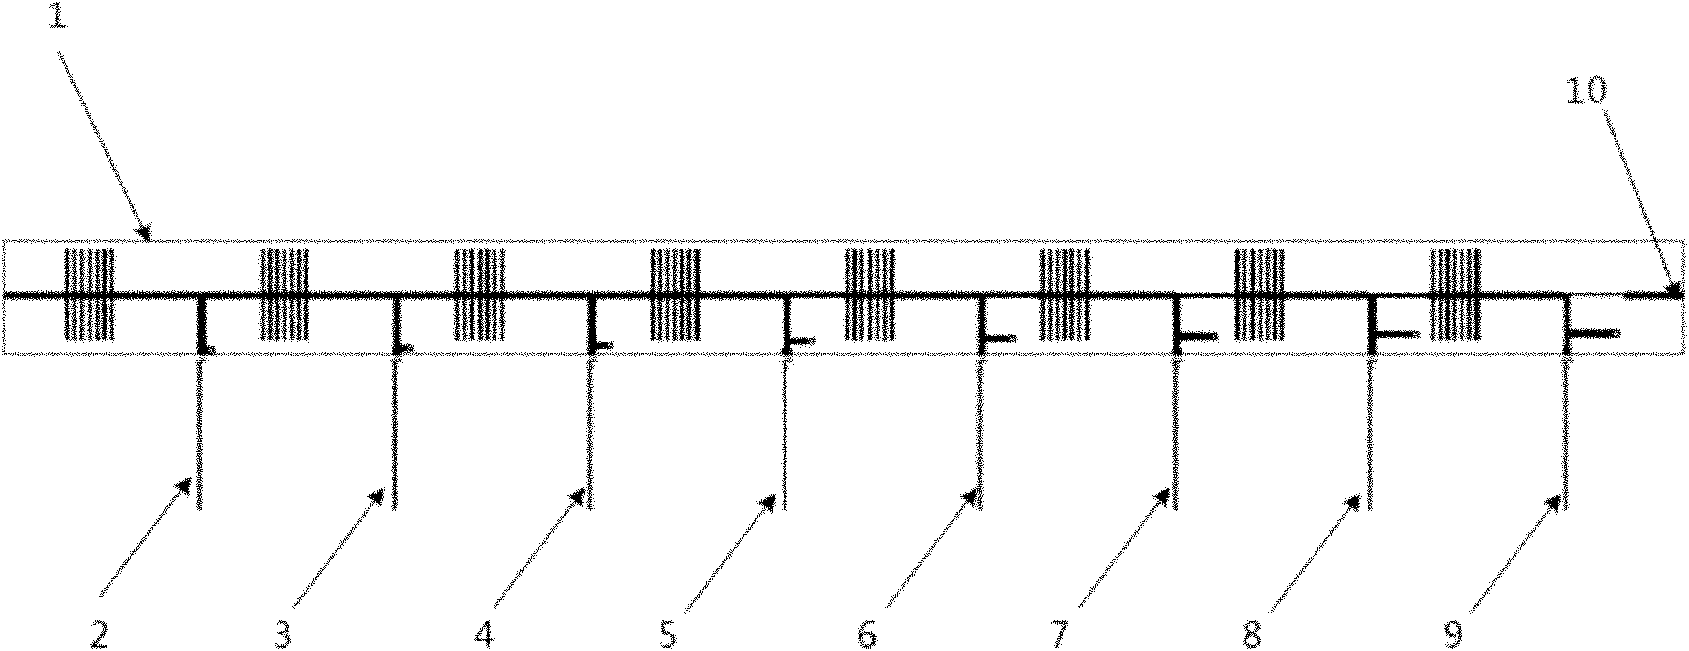 Frequency-scanning antenna array based on CRLH-TL